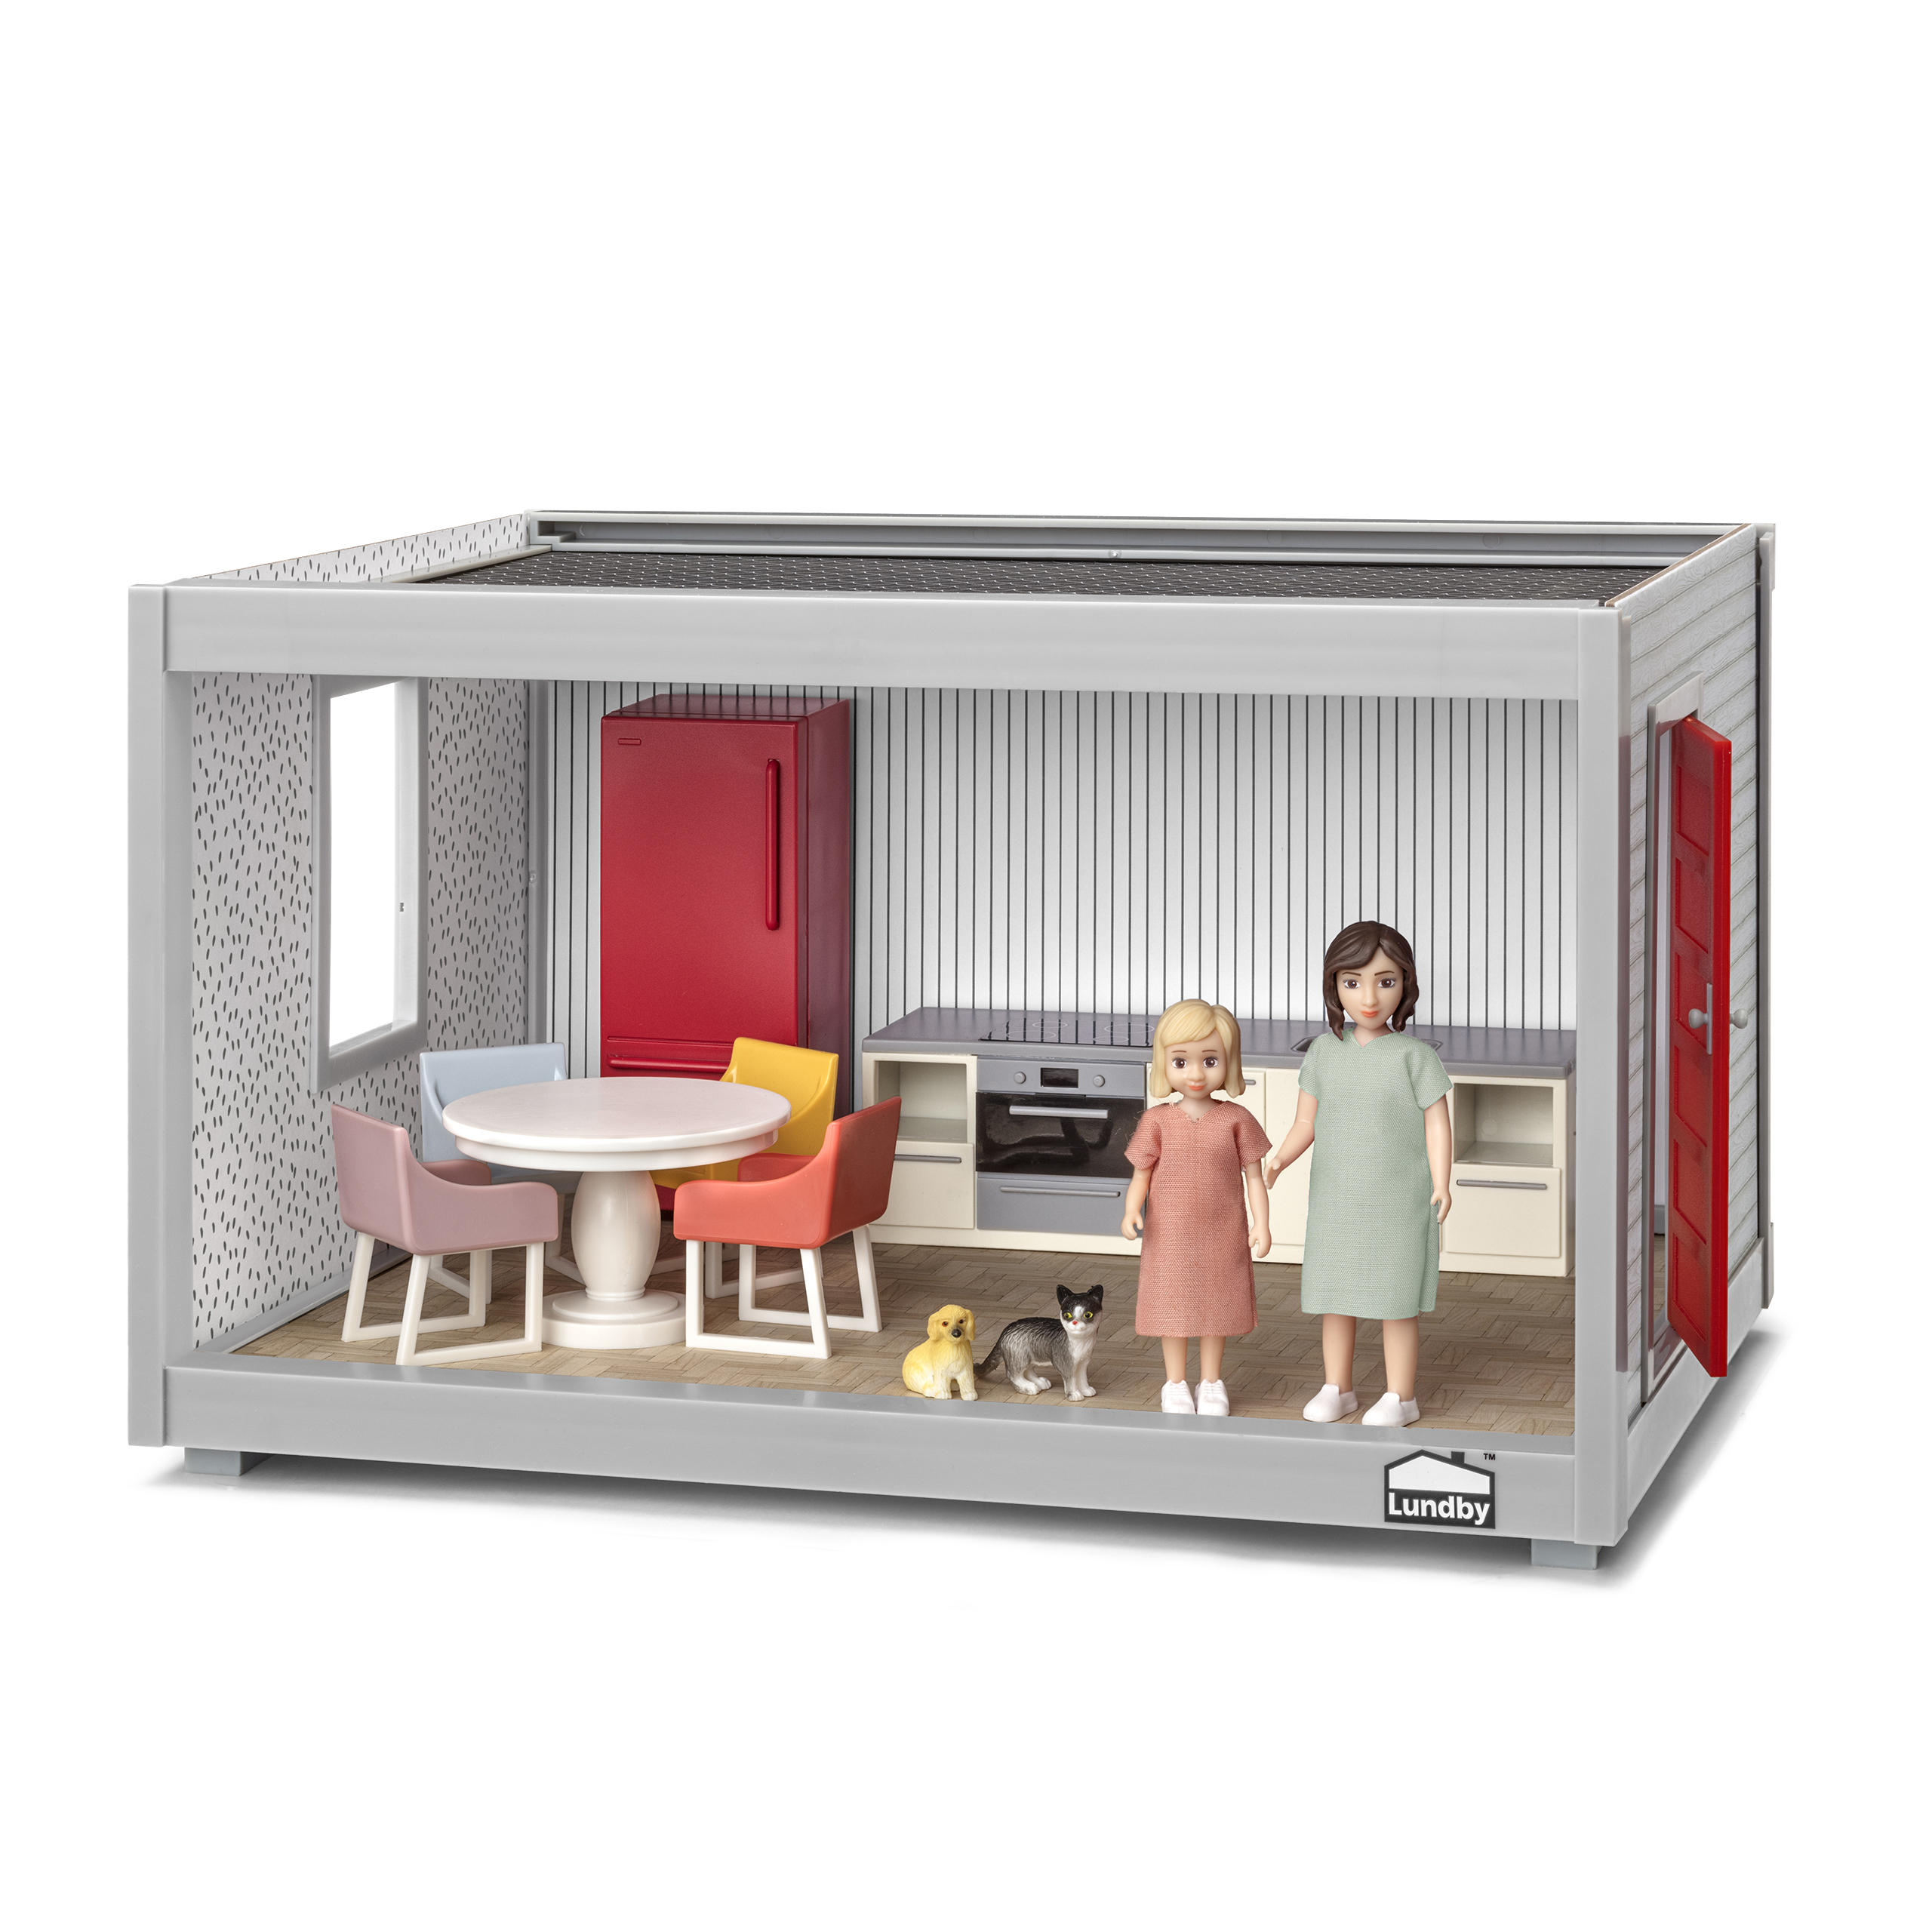 Doll house furniture & doll house accessories lundby doll house complete starter pack